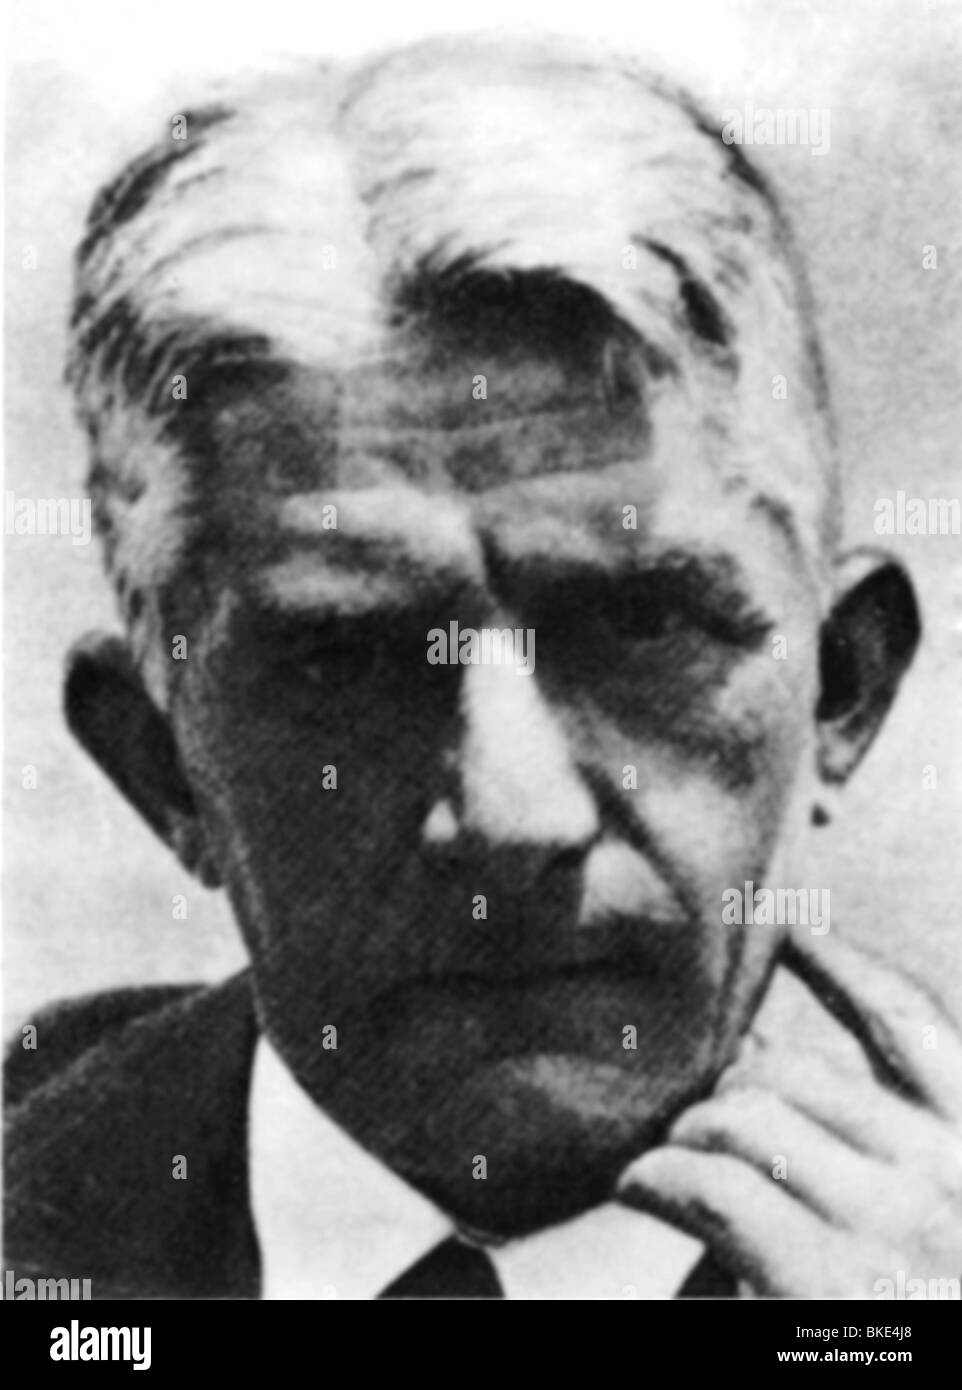 Koehler, Wolfgang, 21.1.1887 - 11.6.1967, German psychologist, co-founder of the Gestalt theory, portrait, Stock Photo